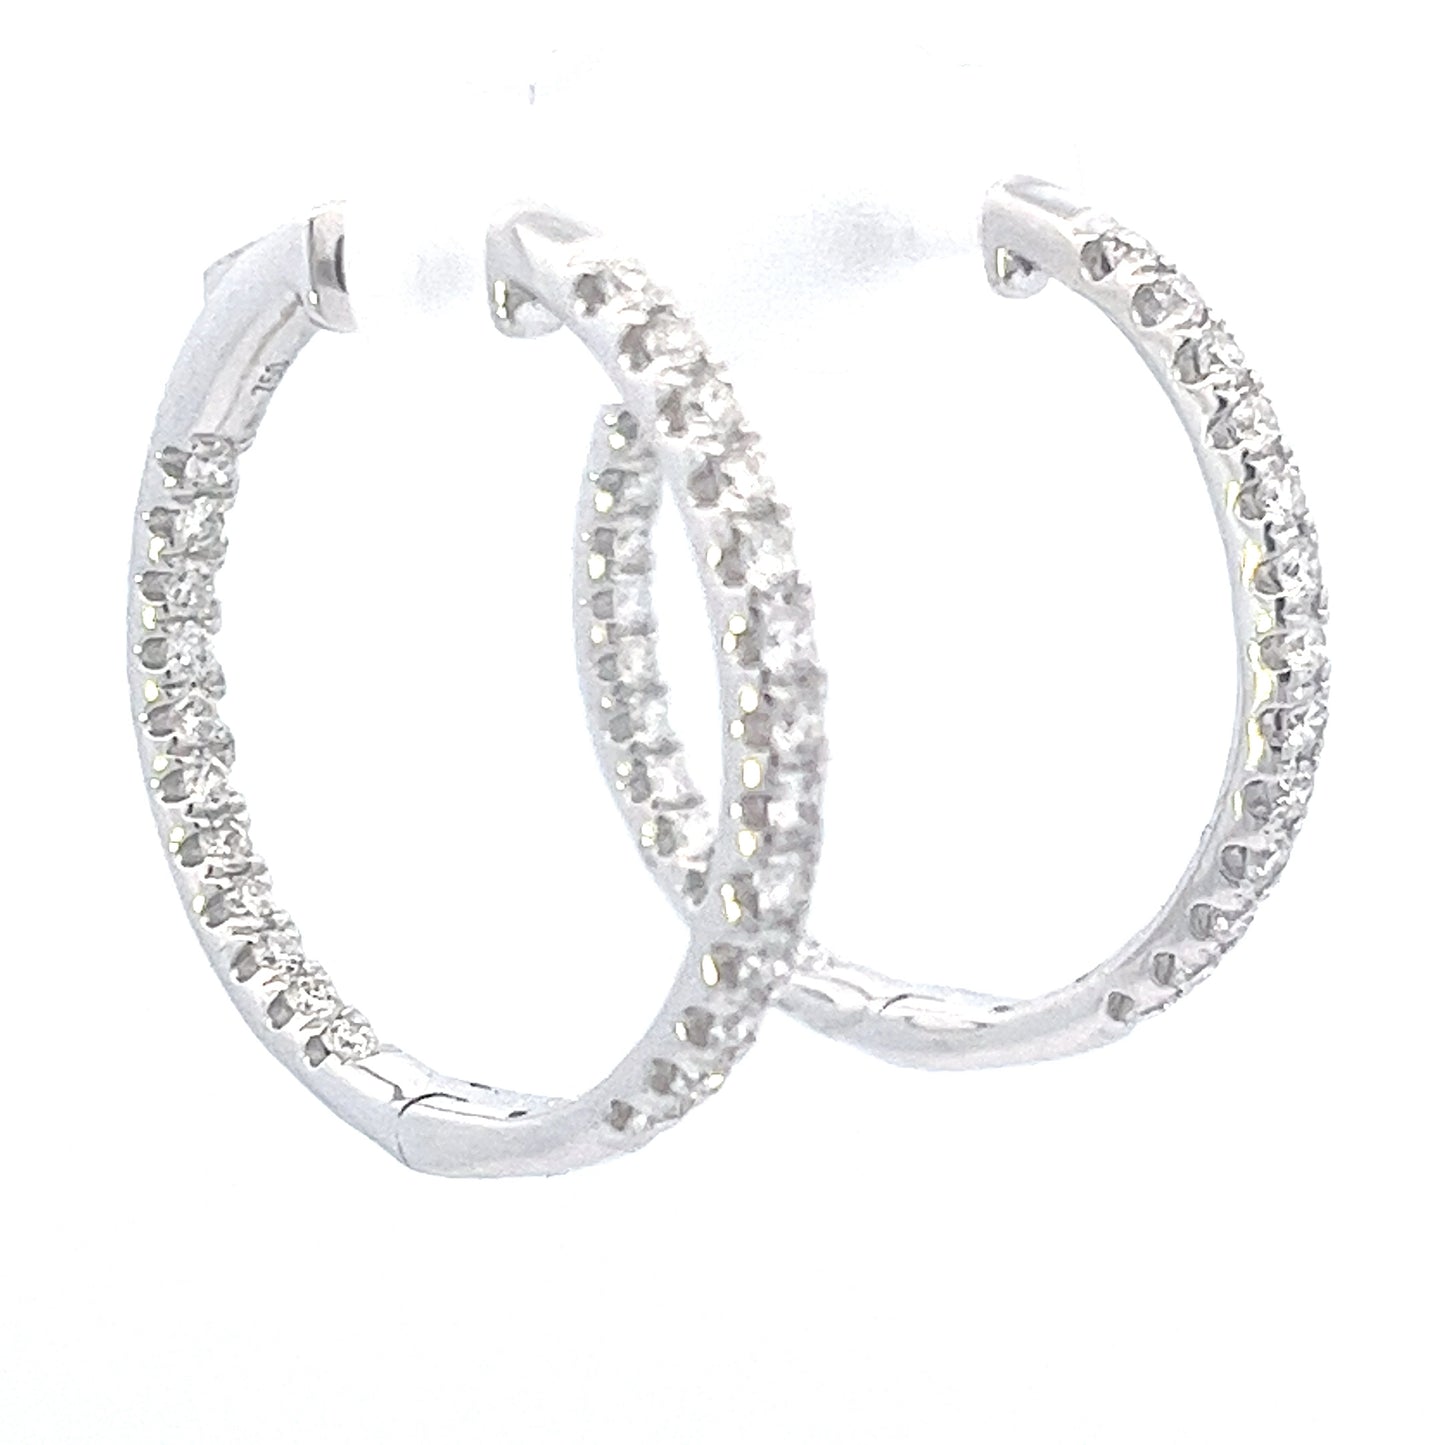 18k White Gold 1.00ct total weight Pave Diamond Hoop Earrings